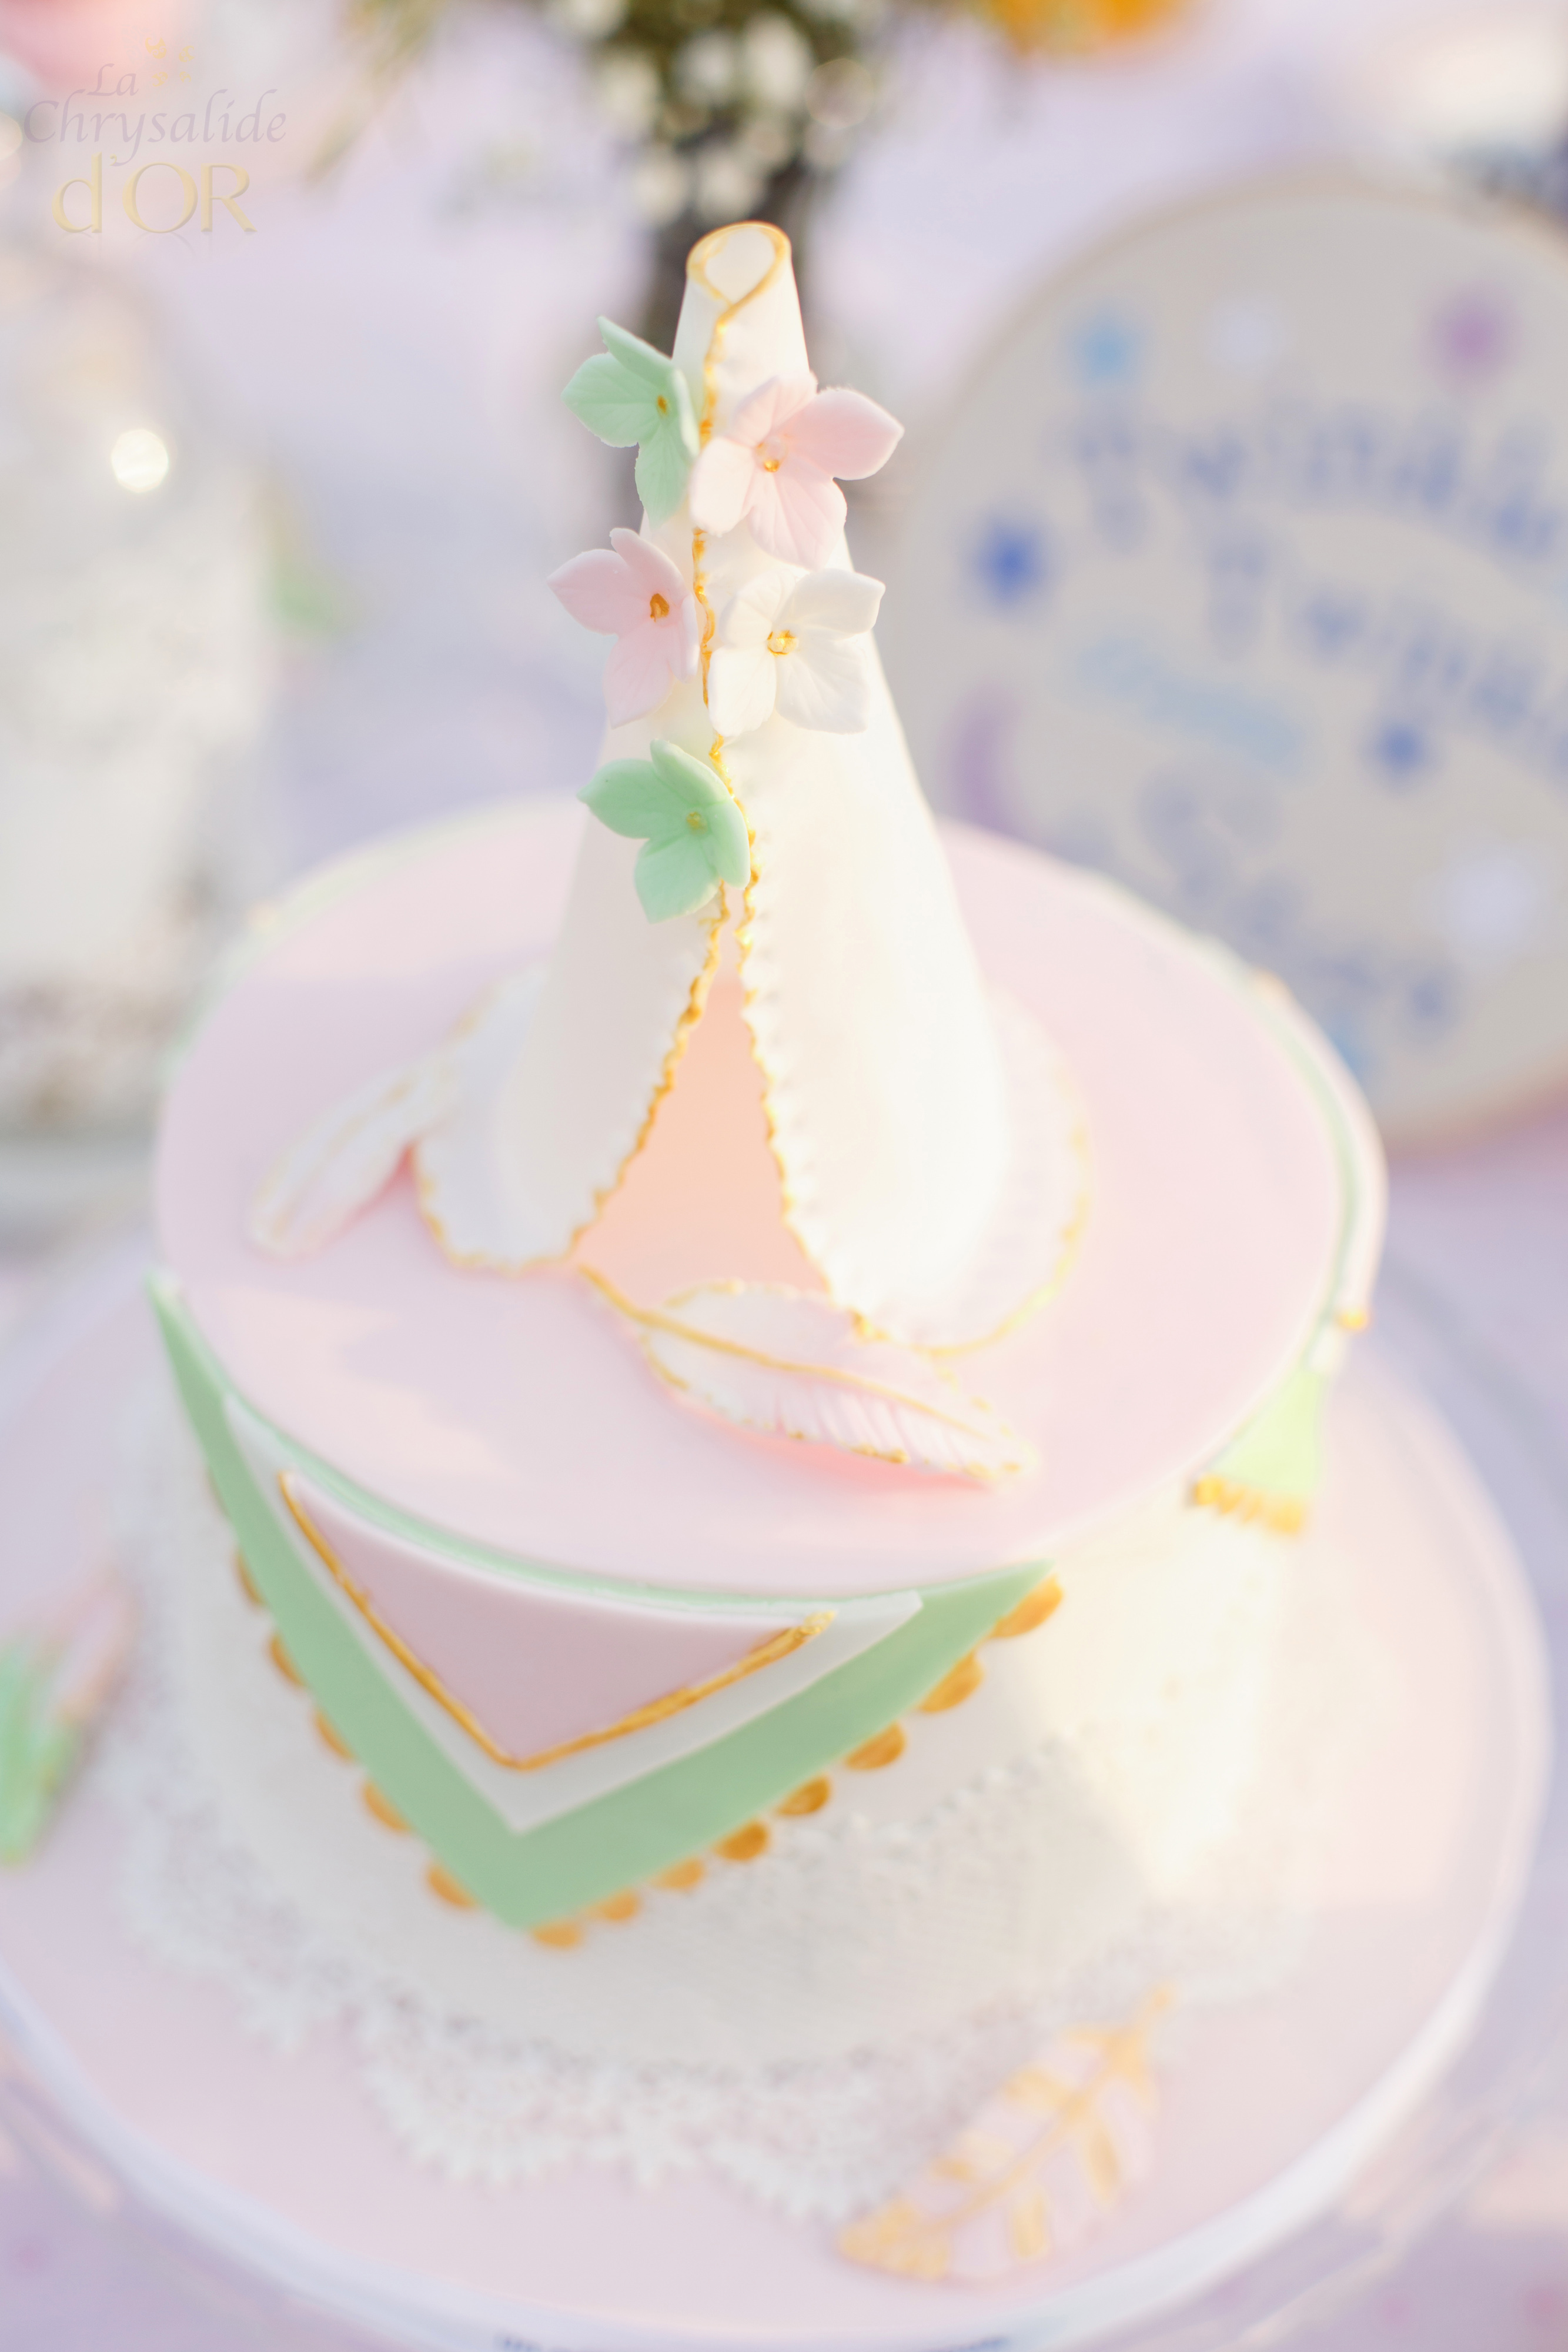 Wedding cake, cup cake baby shower toulouse Montauban Agen